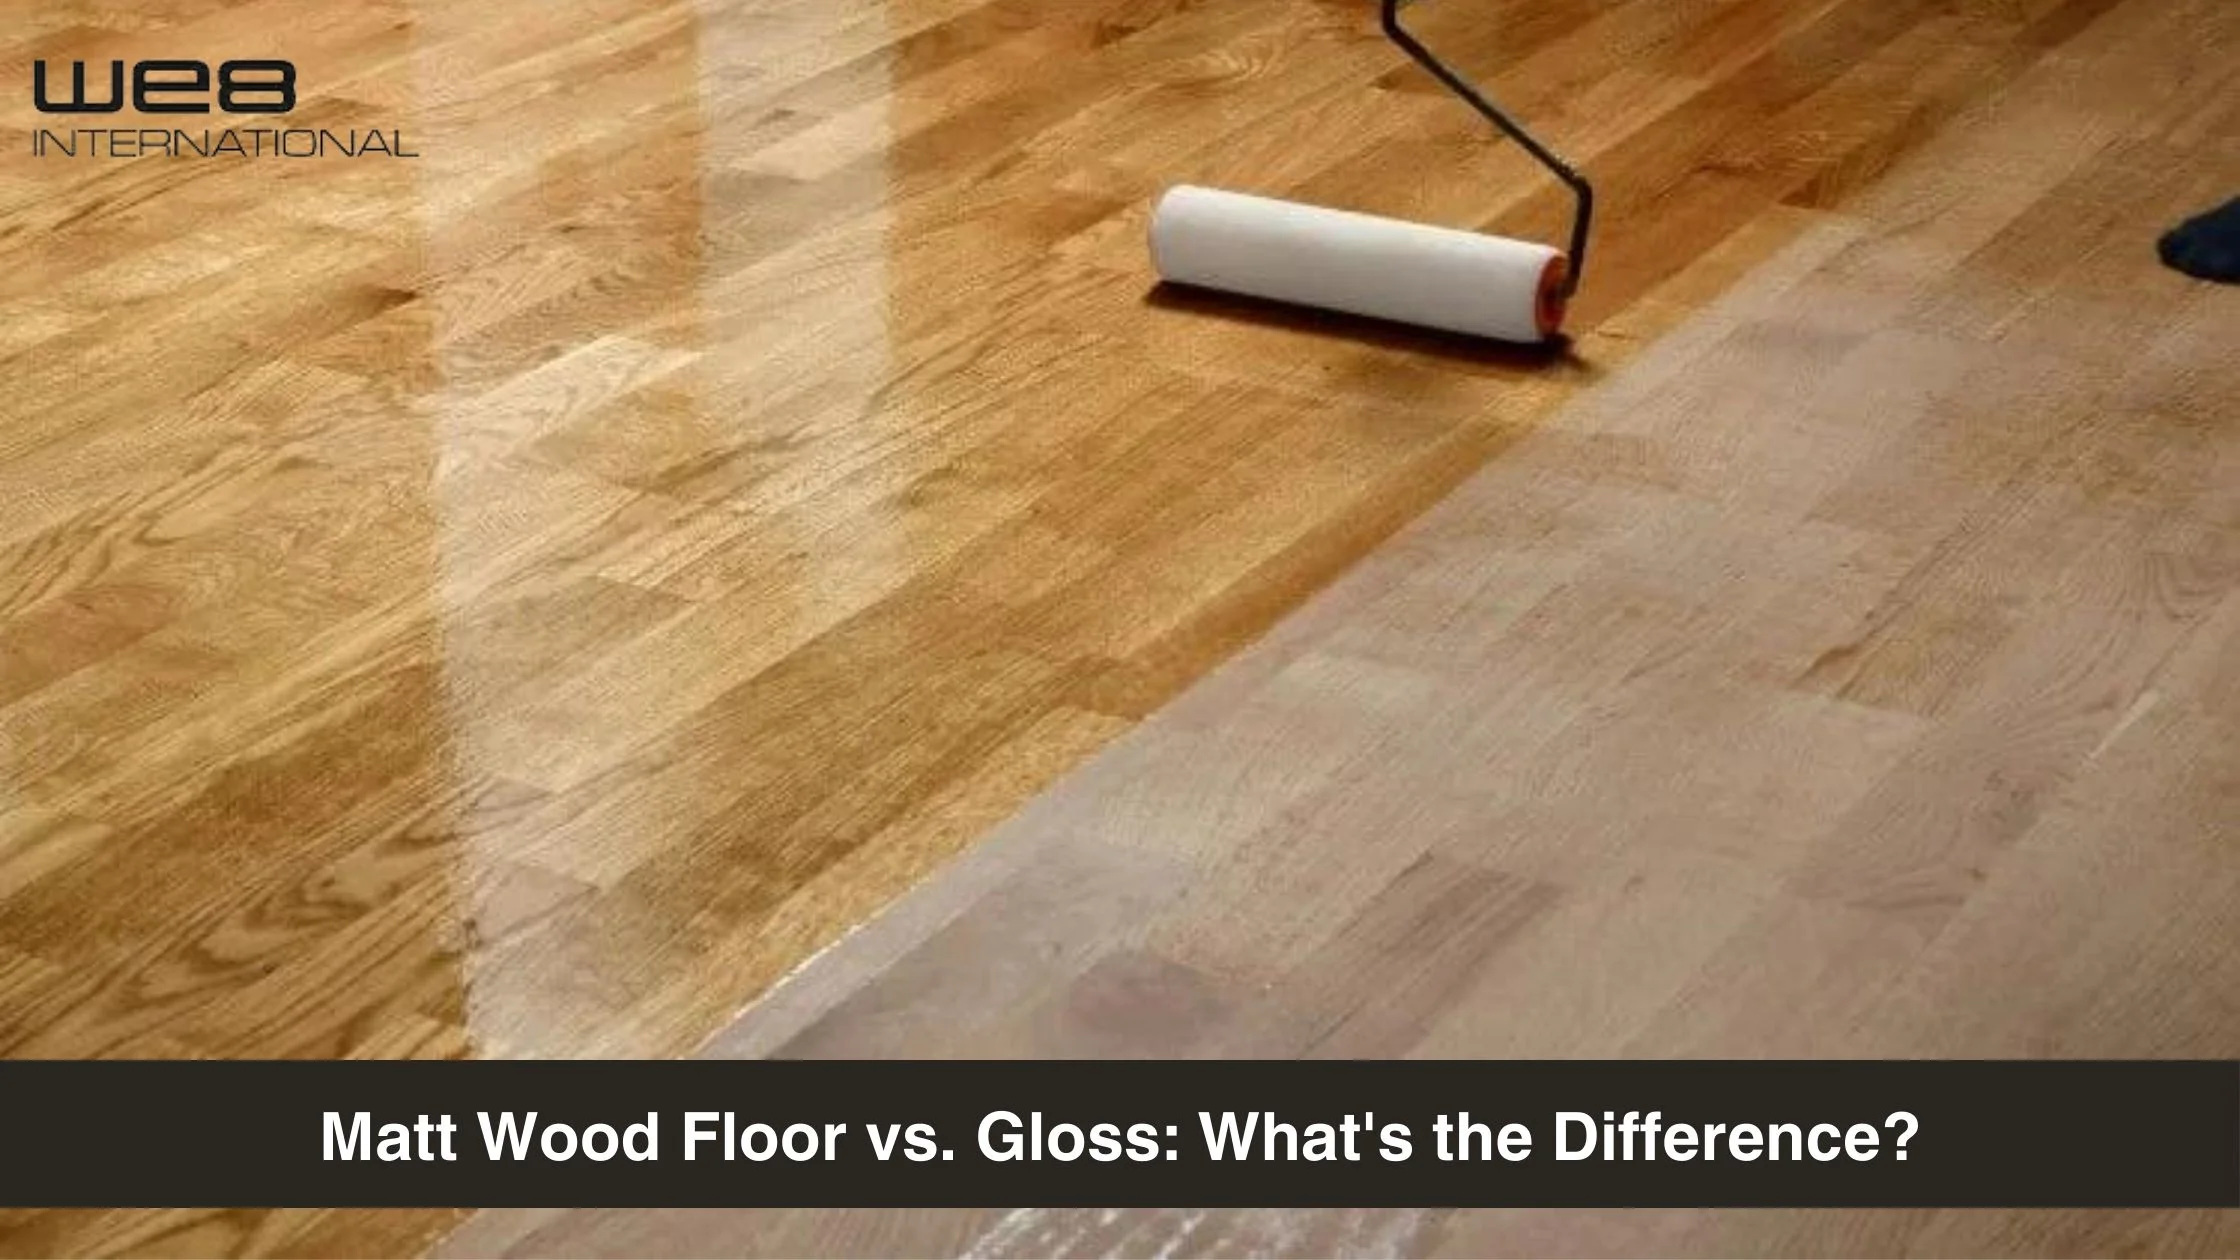 Matt Wood Floor vs. Gloss: What is the Difference?